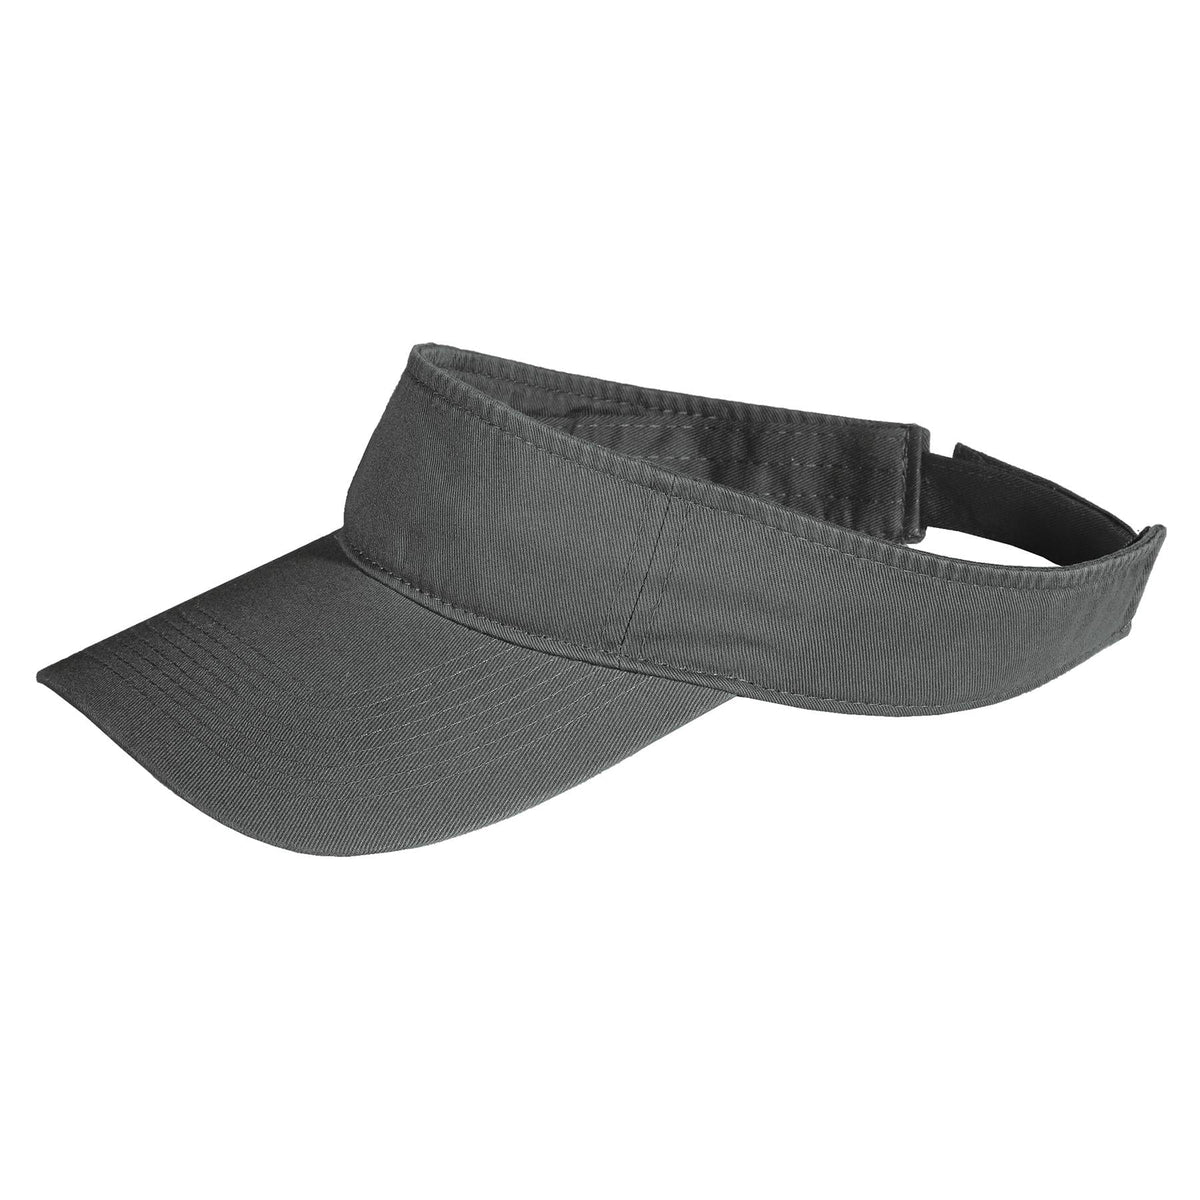 Equestrian Team Apparel Visor Charcoal Sun Visors- Custom equestrian team apparel online tack store mobile tack store custom farm apparel custom show stable clothing equestrian lifestyle horse show clothing riding clothes horses equestrian tack store